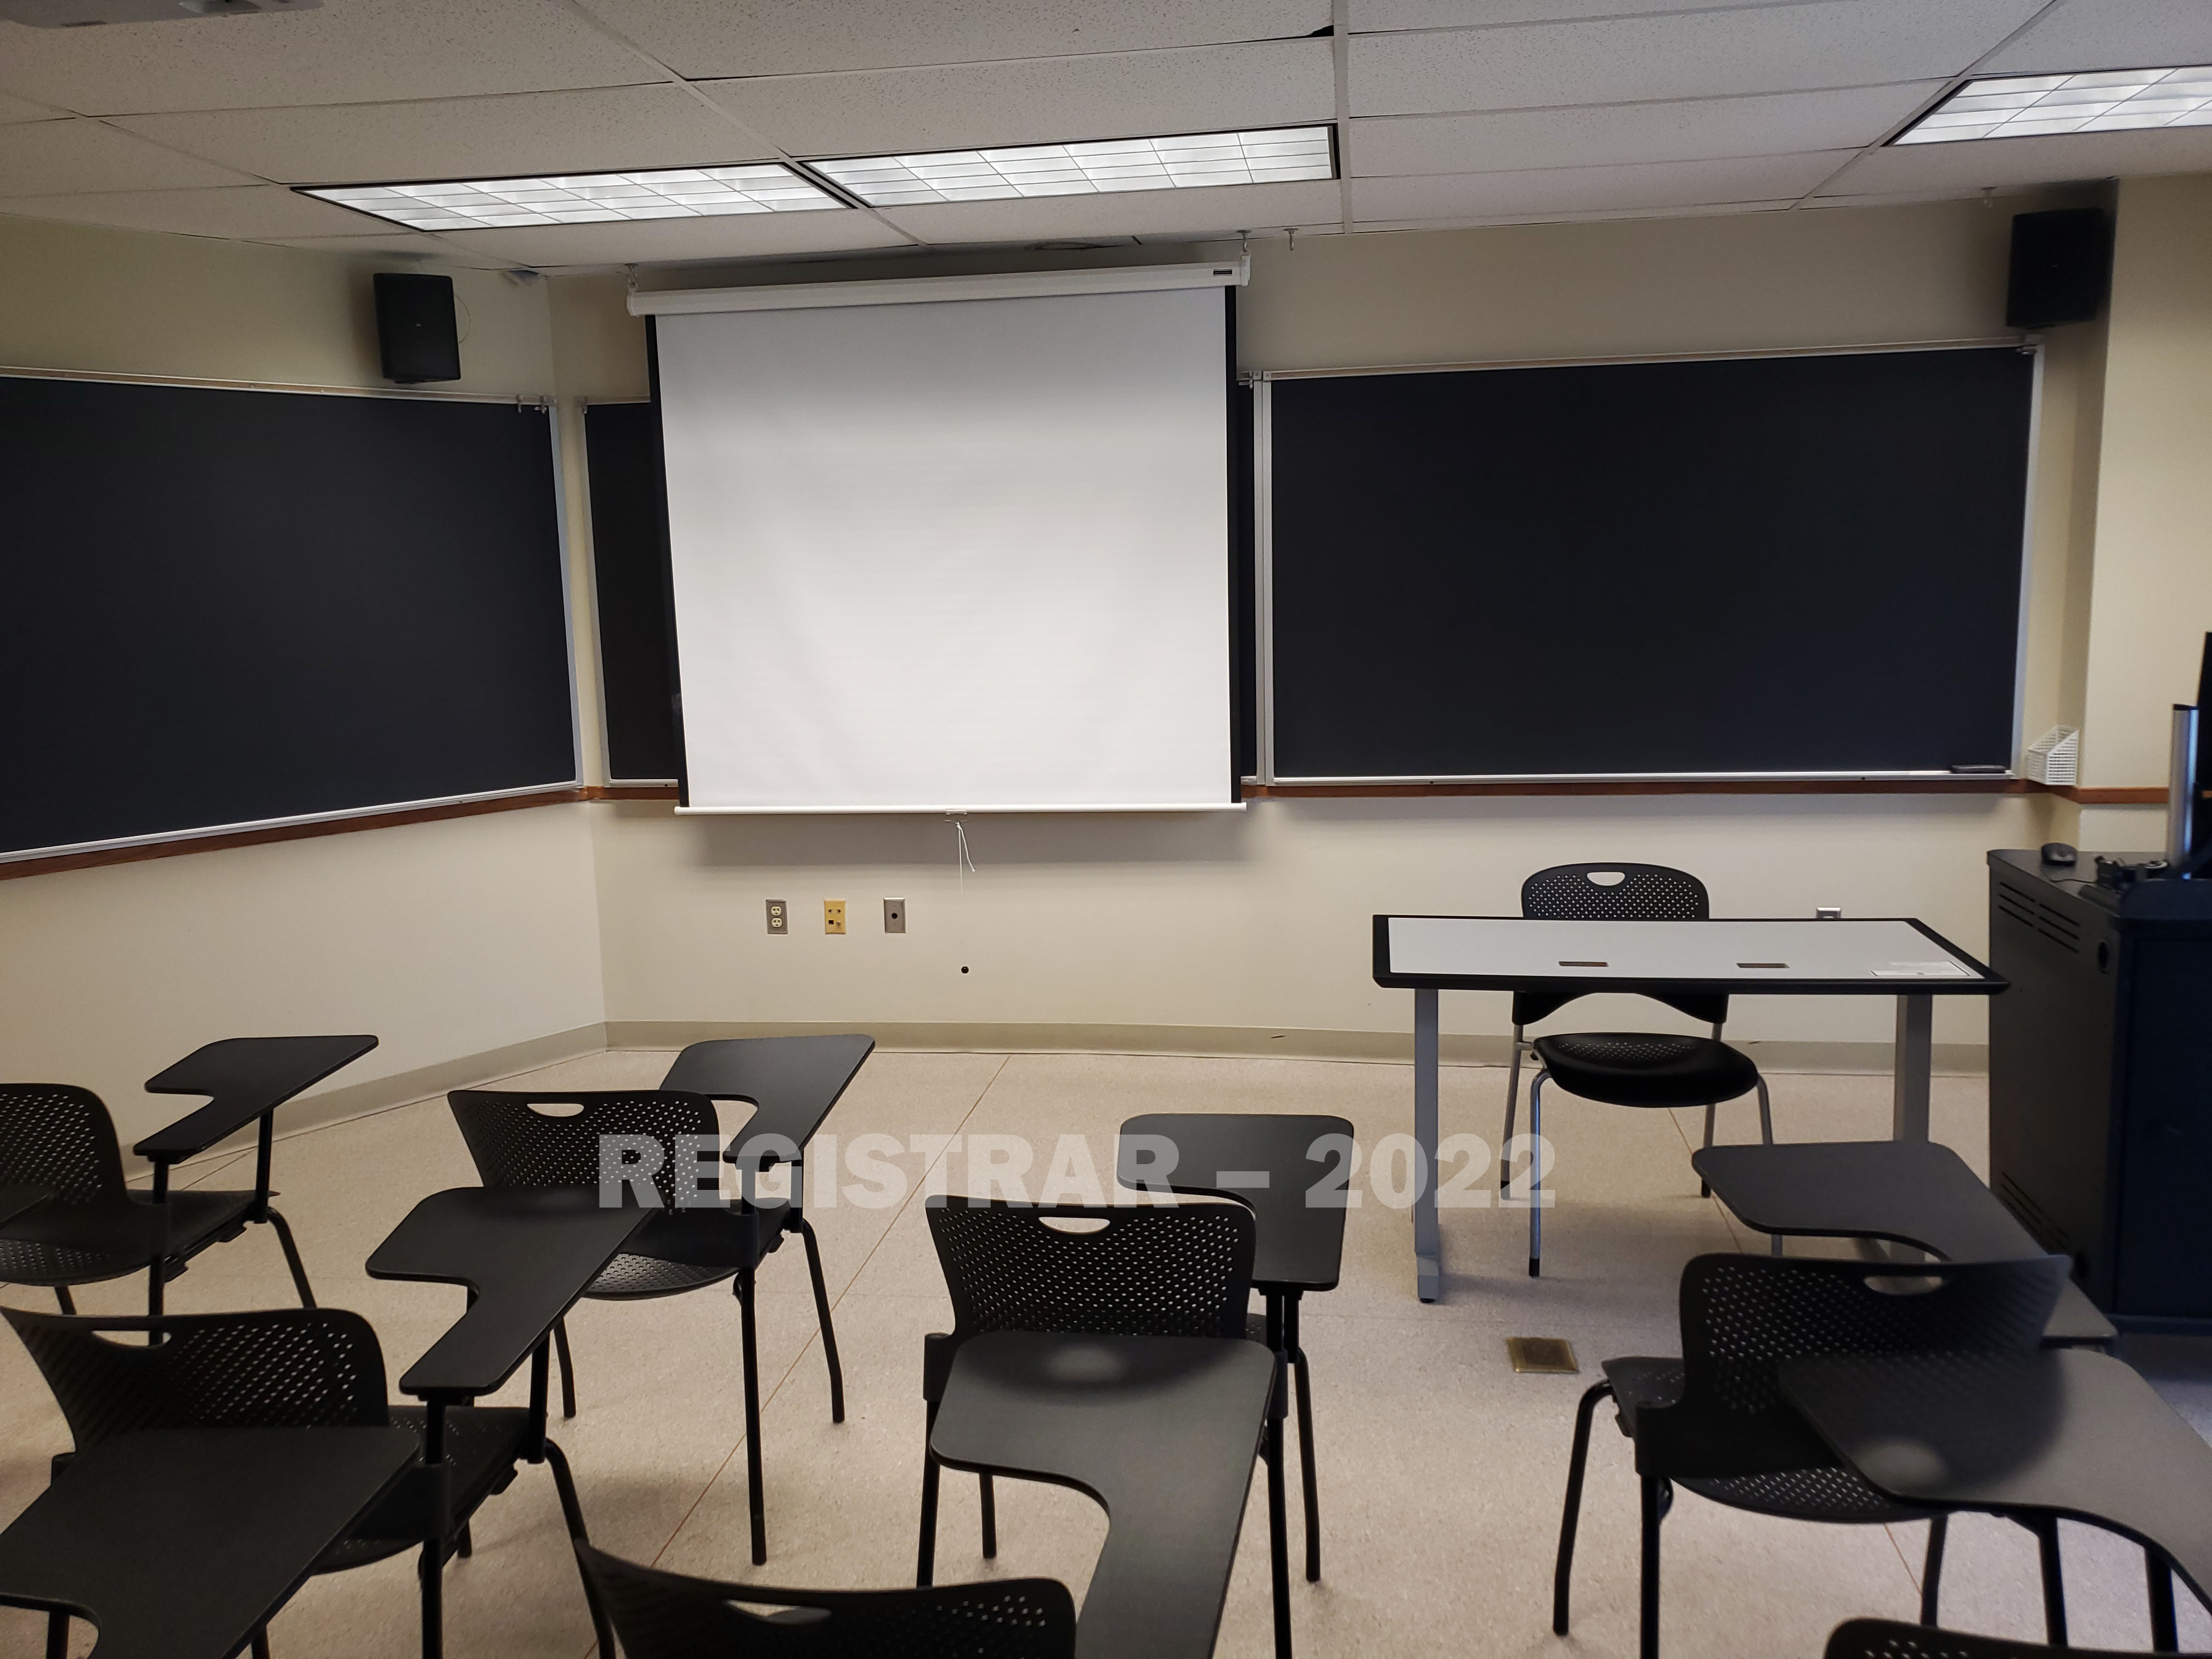 Enarson Classroom Building room 318 view from the back of the room with projector screen down